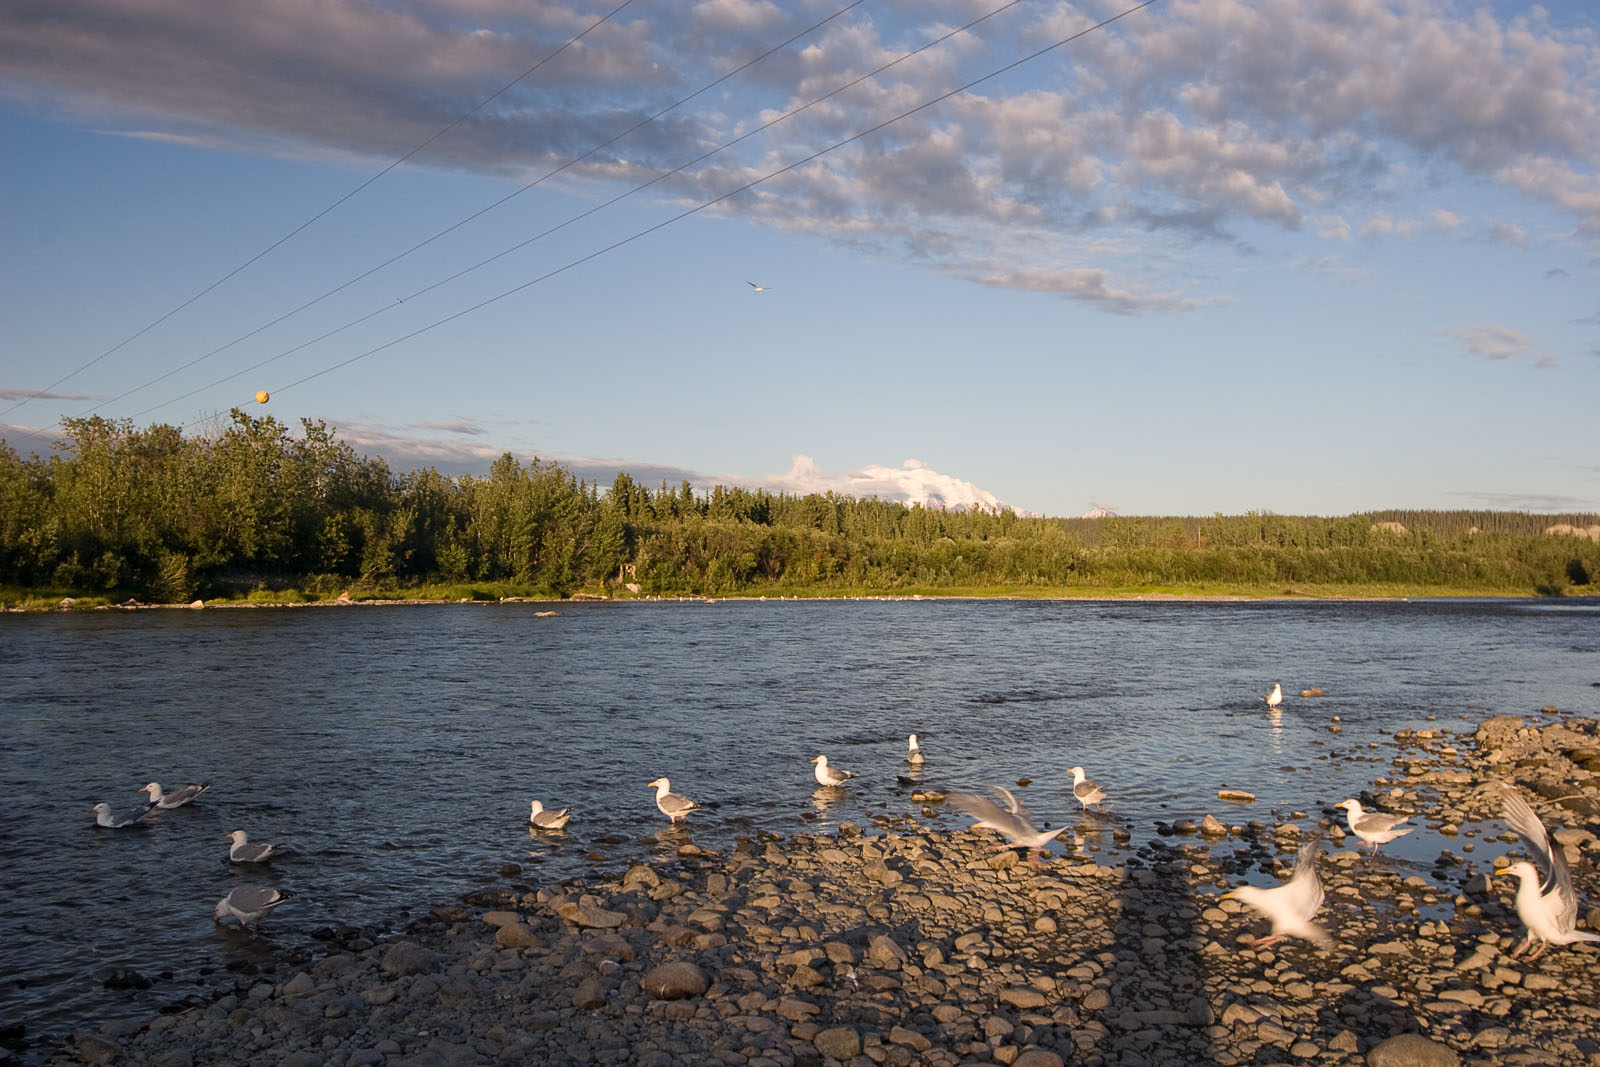 These seagulls live at the salmon-cleaning station during this time of year. From the Gulkana River in Alaska.